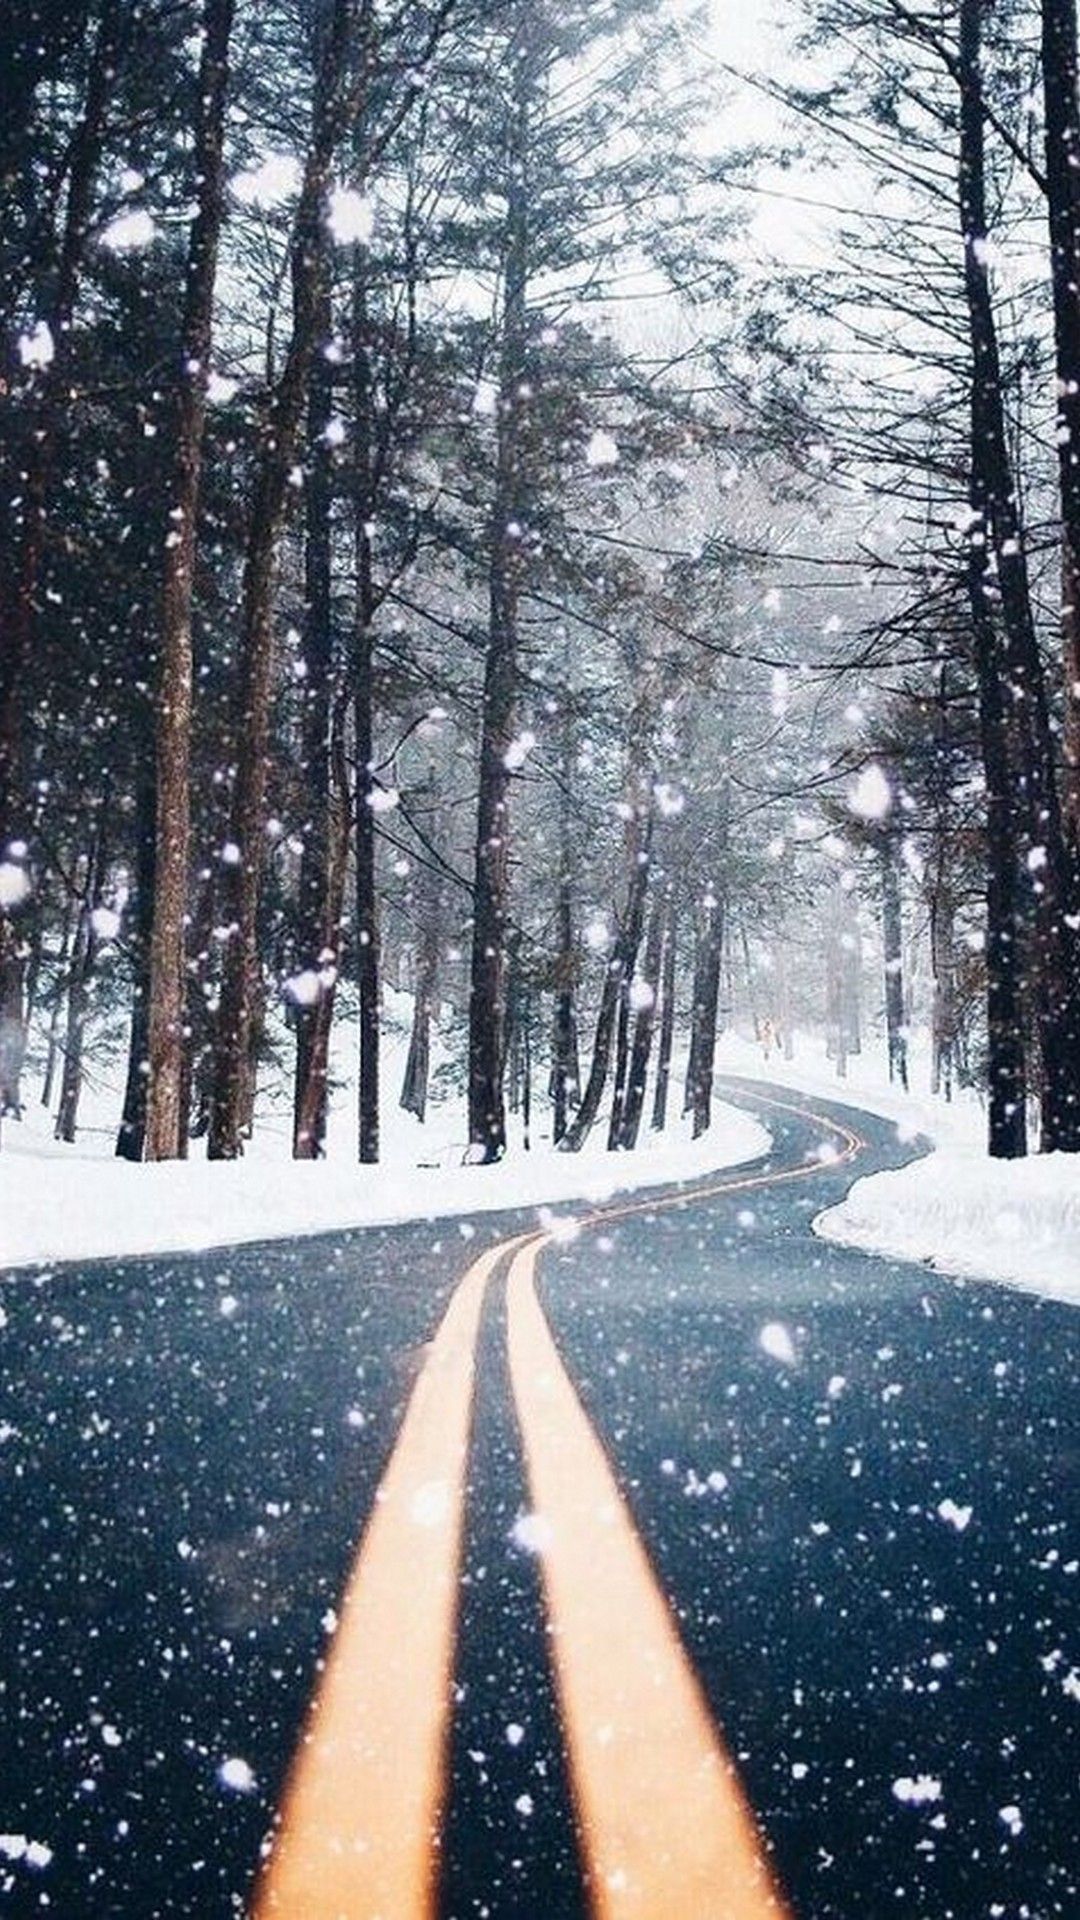 IPhone wallpaper of a snowy road in the woods - Winter, road, snow, Los Angeles, woods